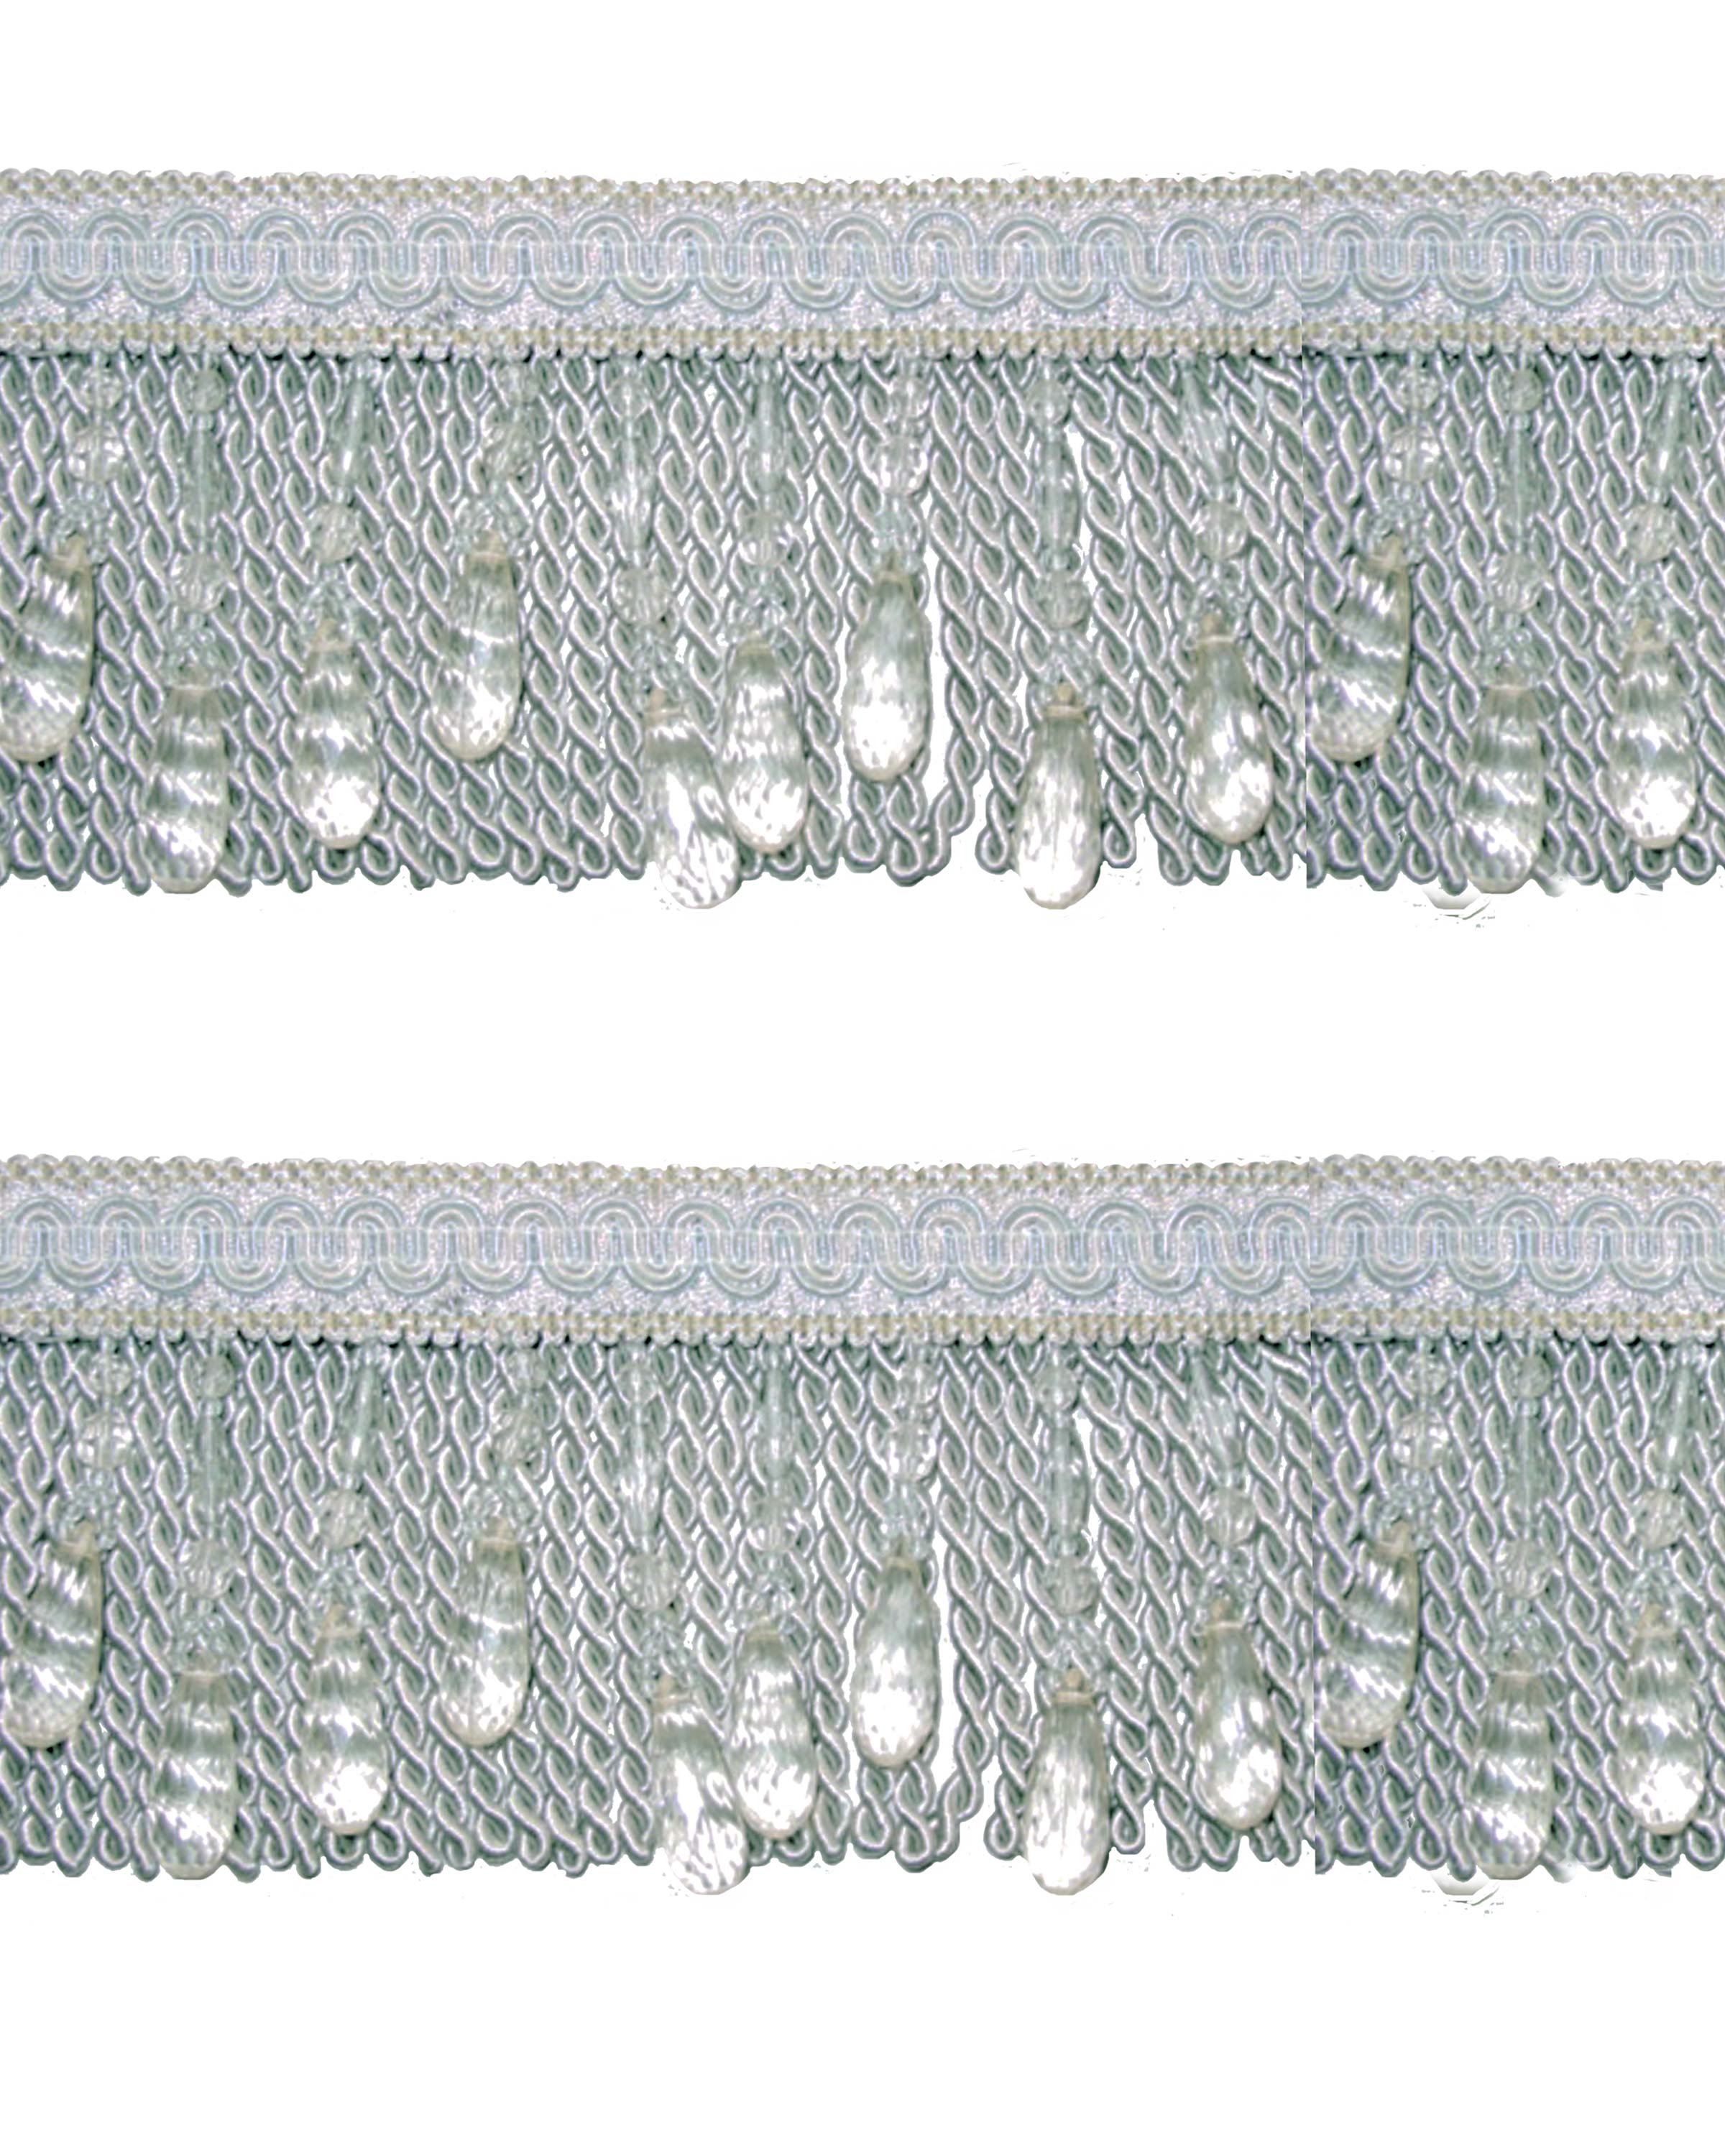 Bullion Fringe with Beads - Pale Silver Blue / Acrylic 105mm Price is for 5 metres